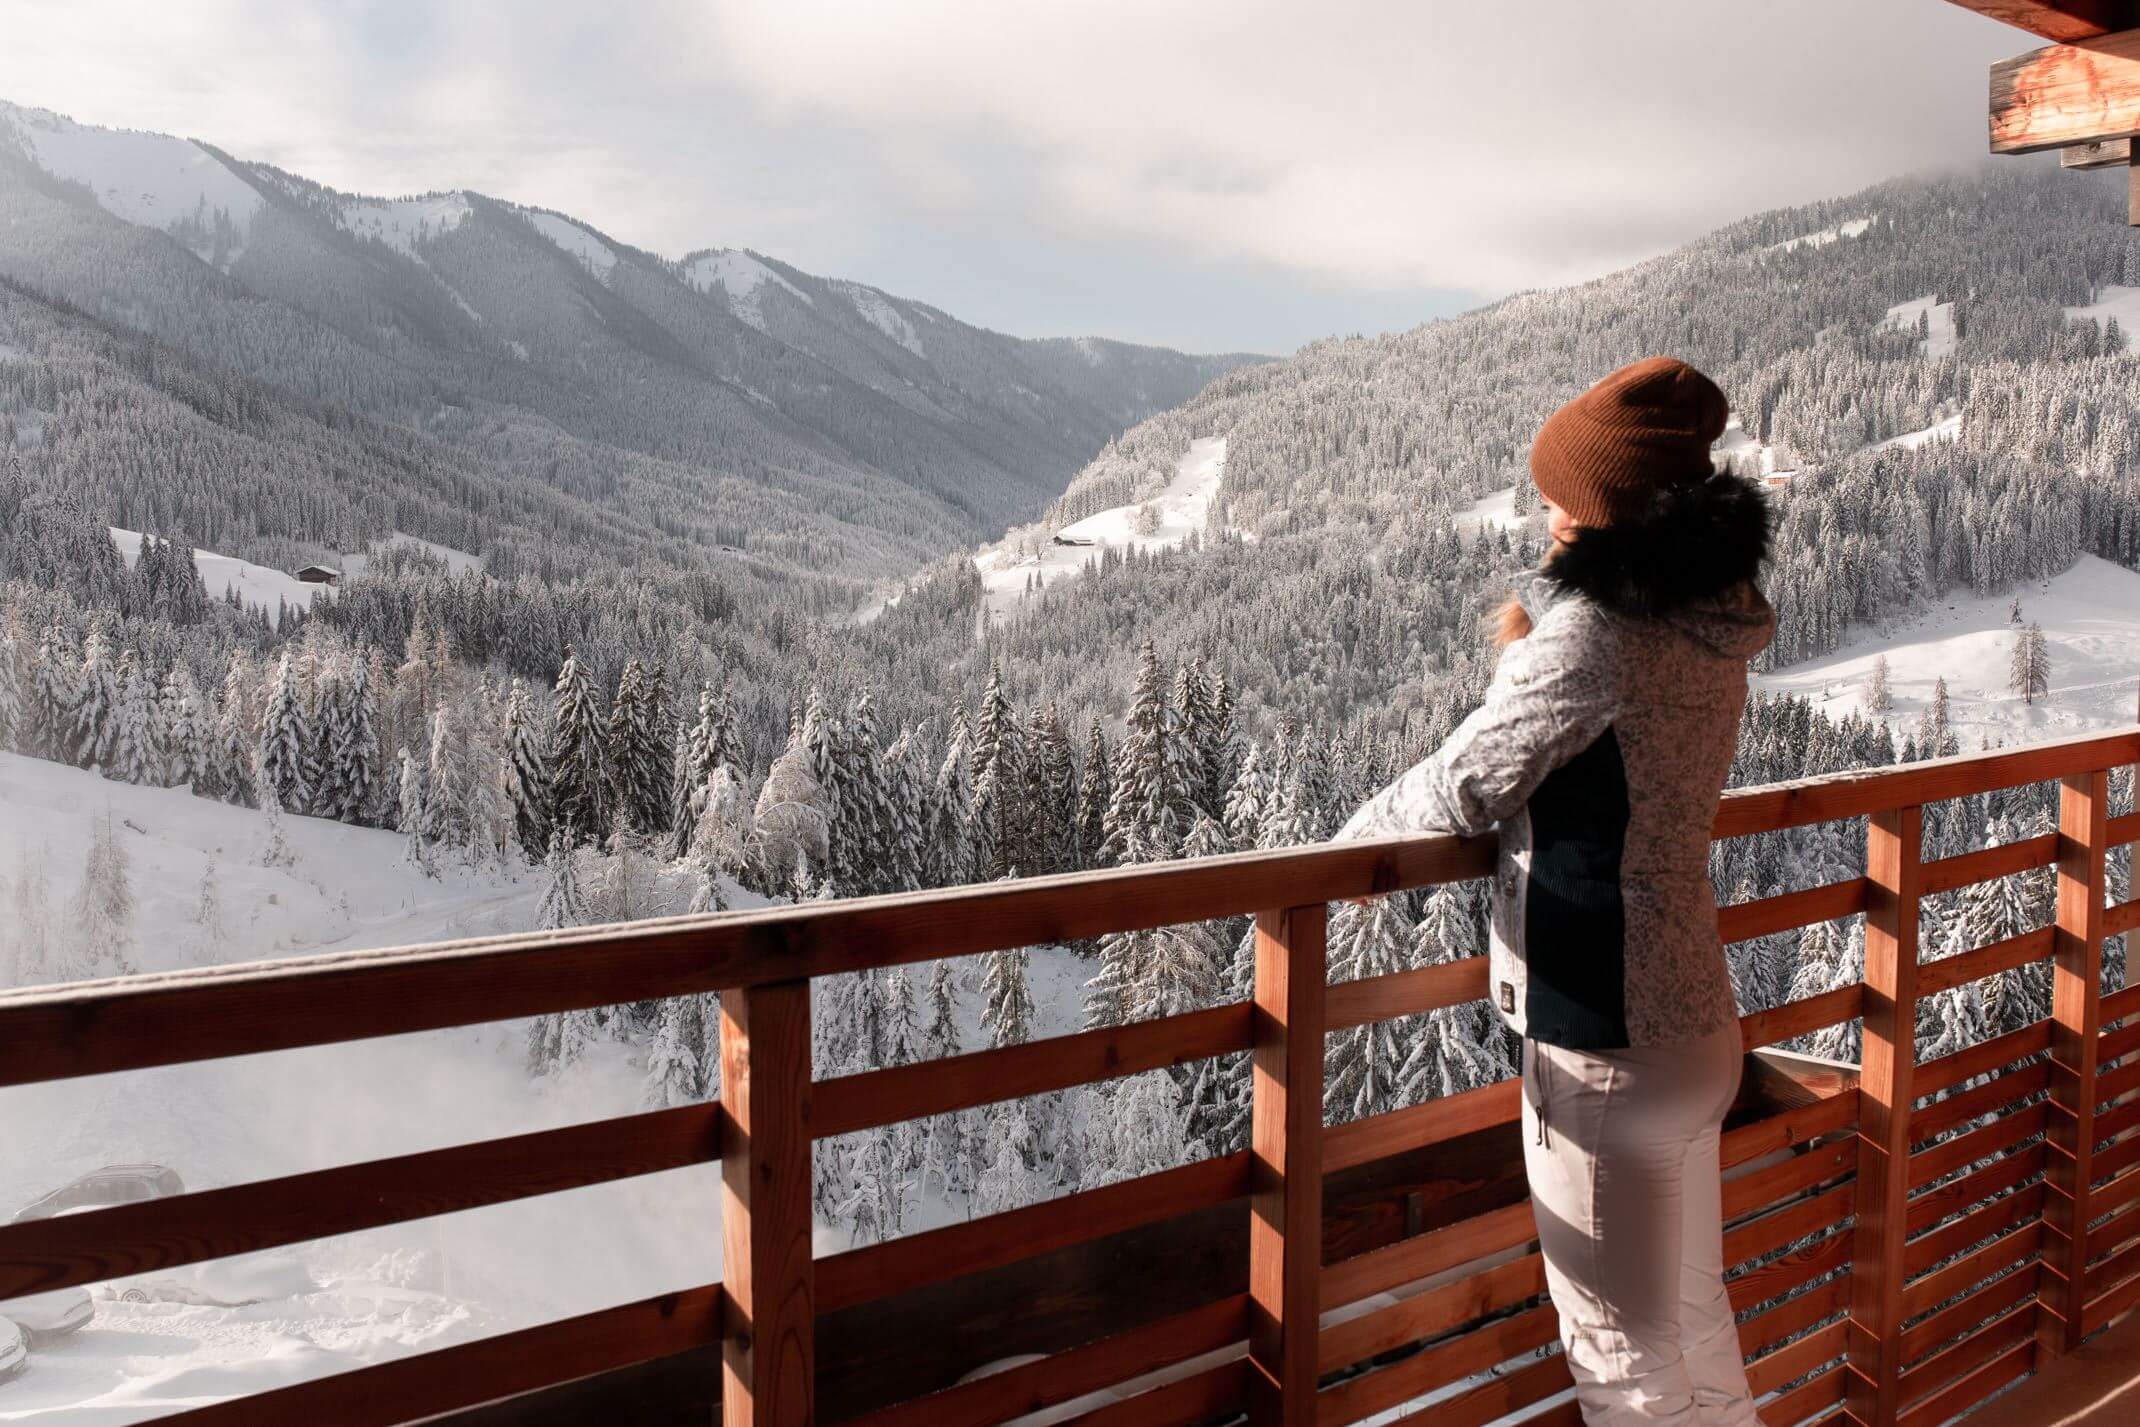 A WINTER WEEKEND AT FORSTHOFALM HOTEL AND SPA, AUSTRIA